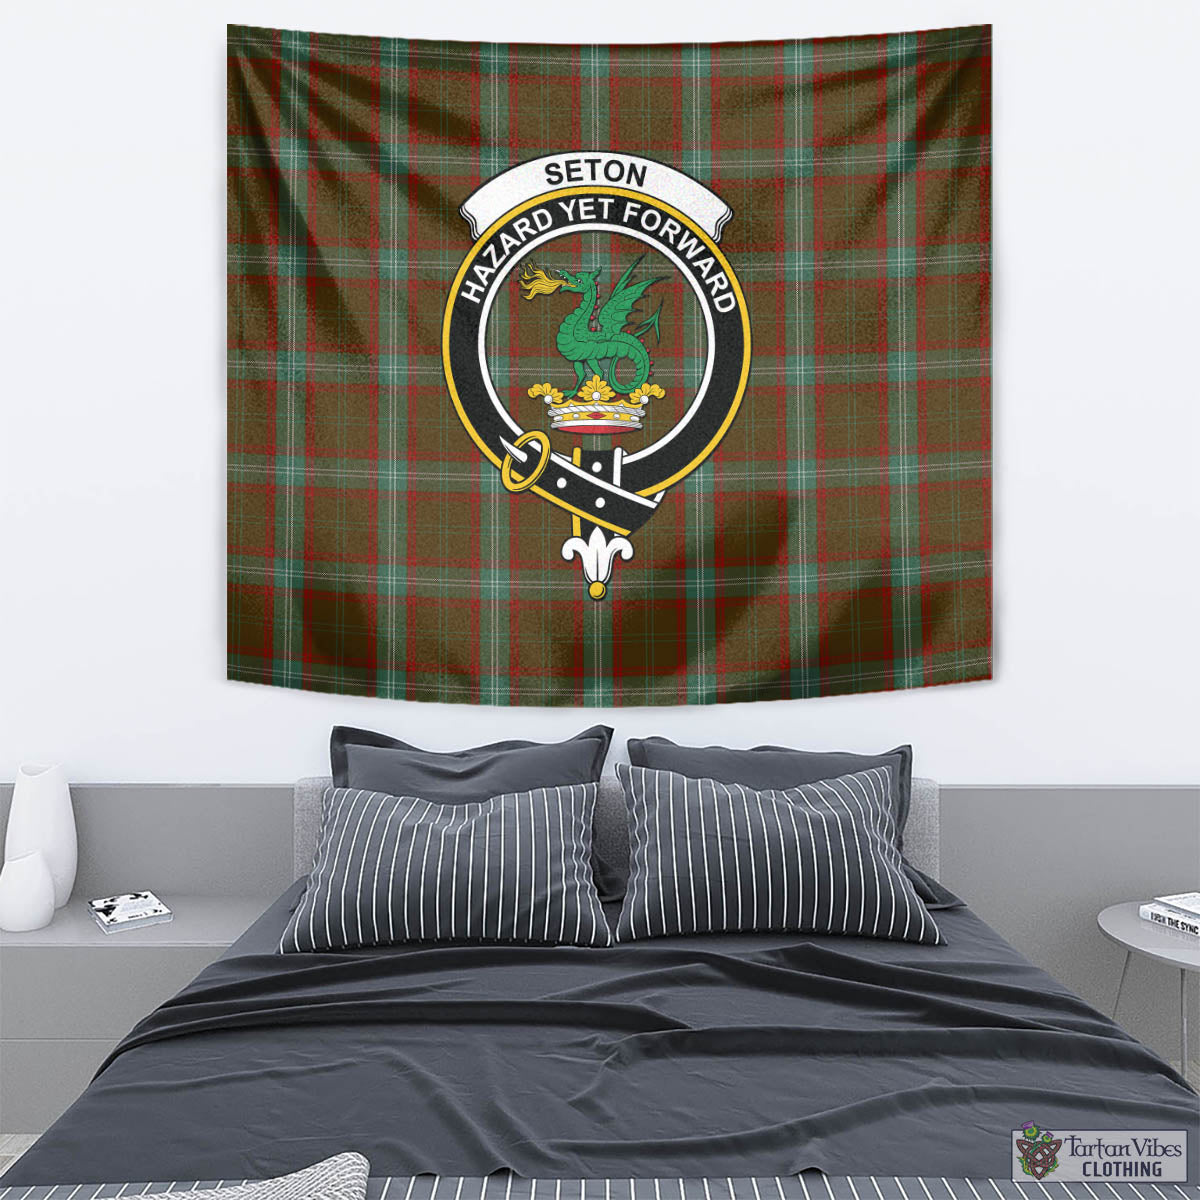 Tartan Vibes Clothing Seton Hunting Tartan Tapestry Wall Hanging and Home Decor for Room with Family Crest